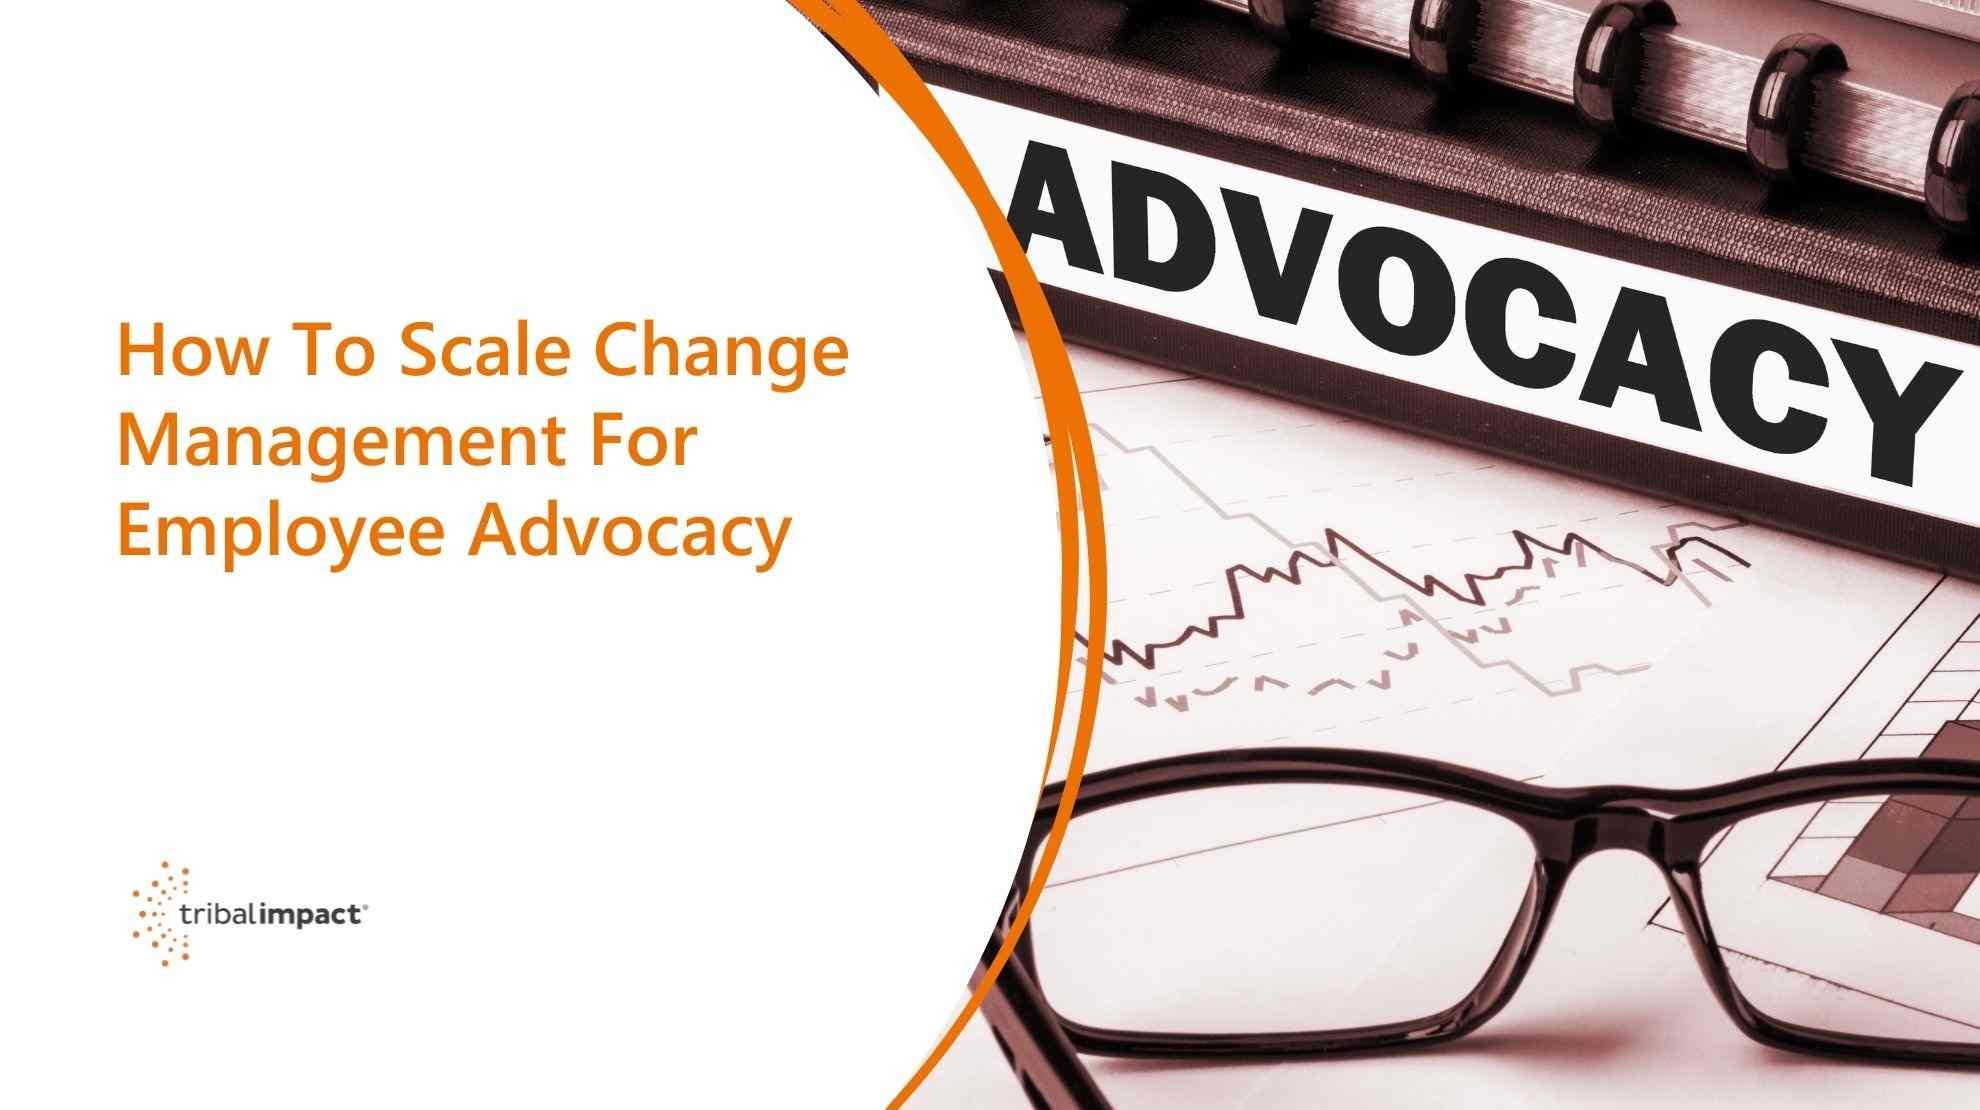 How to scale change management for employee advocacy blog image